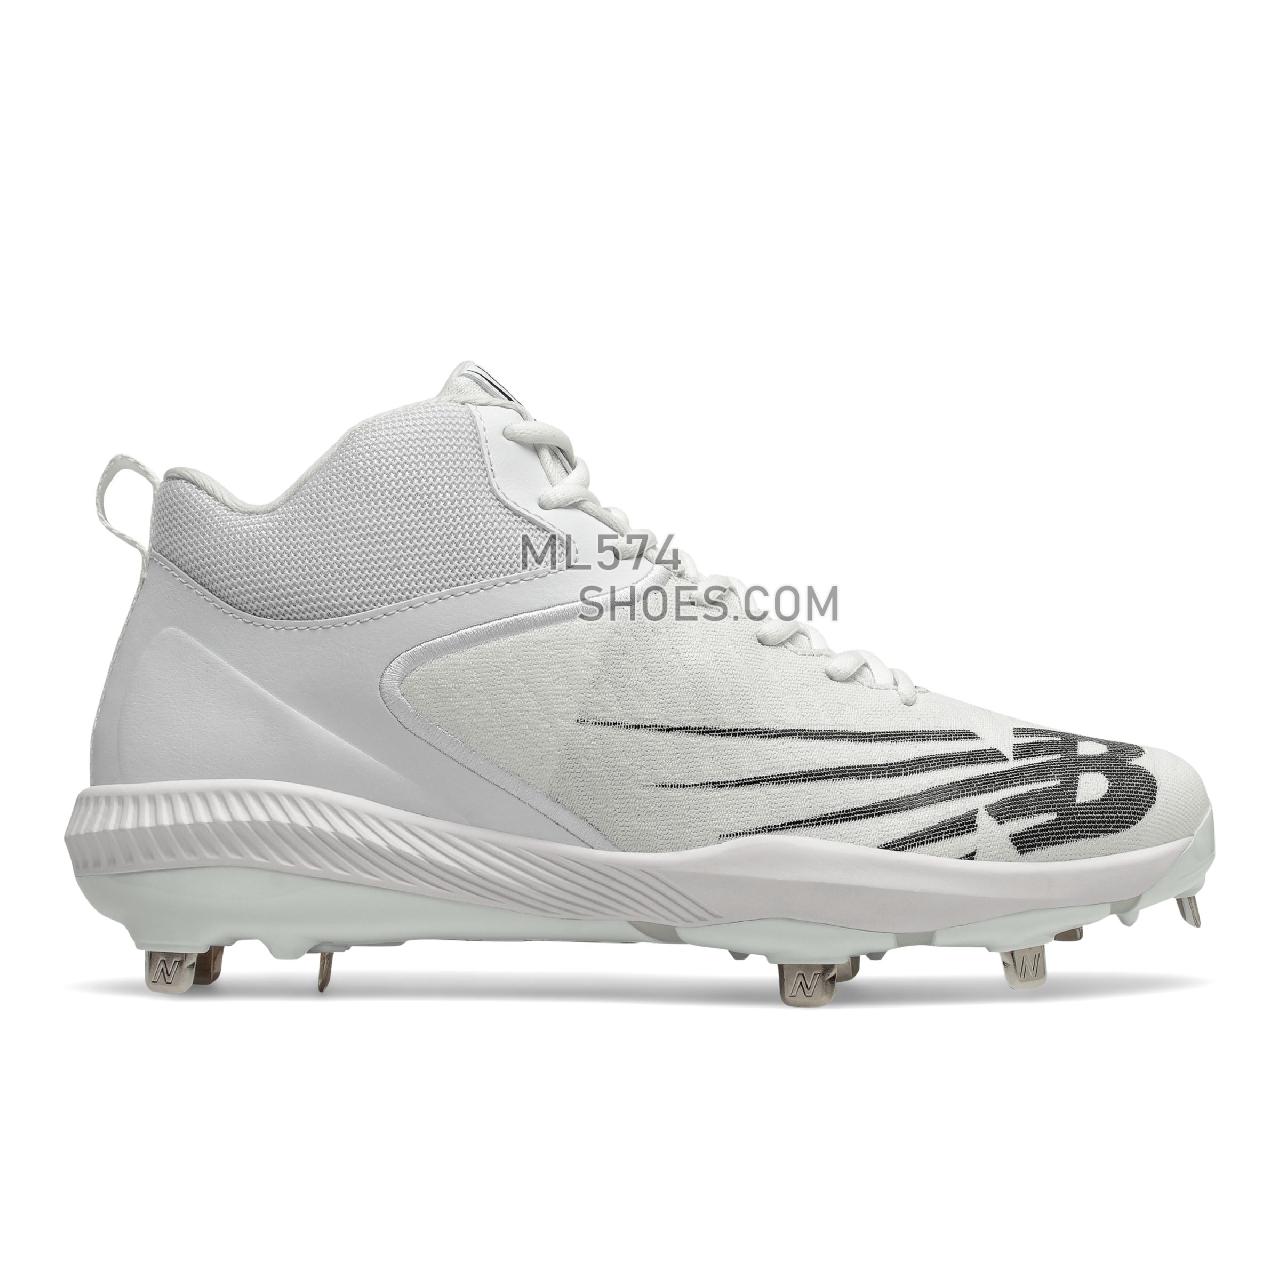 New Balance FuelCell 4040 v6 Mid-Metal - Men's Mid-Cut Baseball Cleats - White with Black - M4040TW6